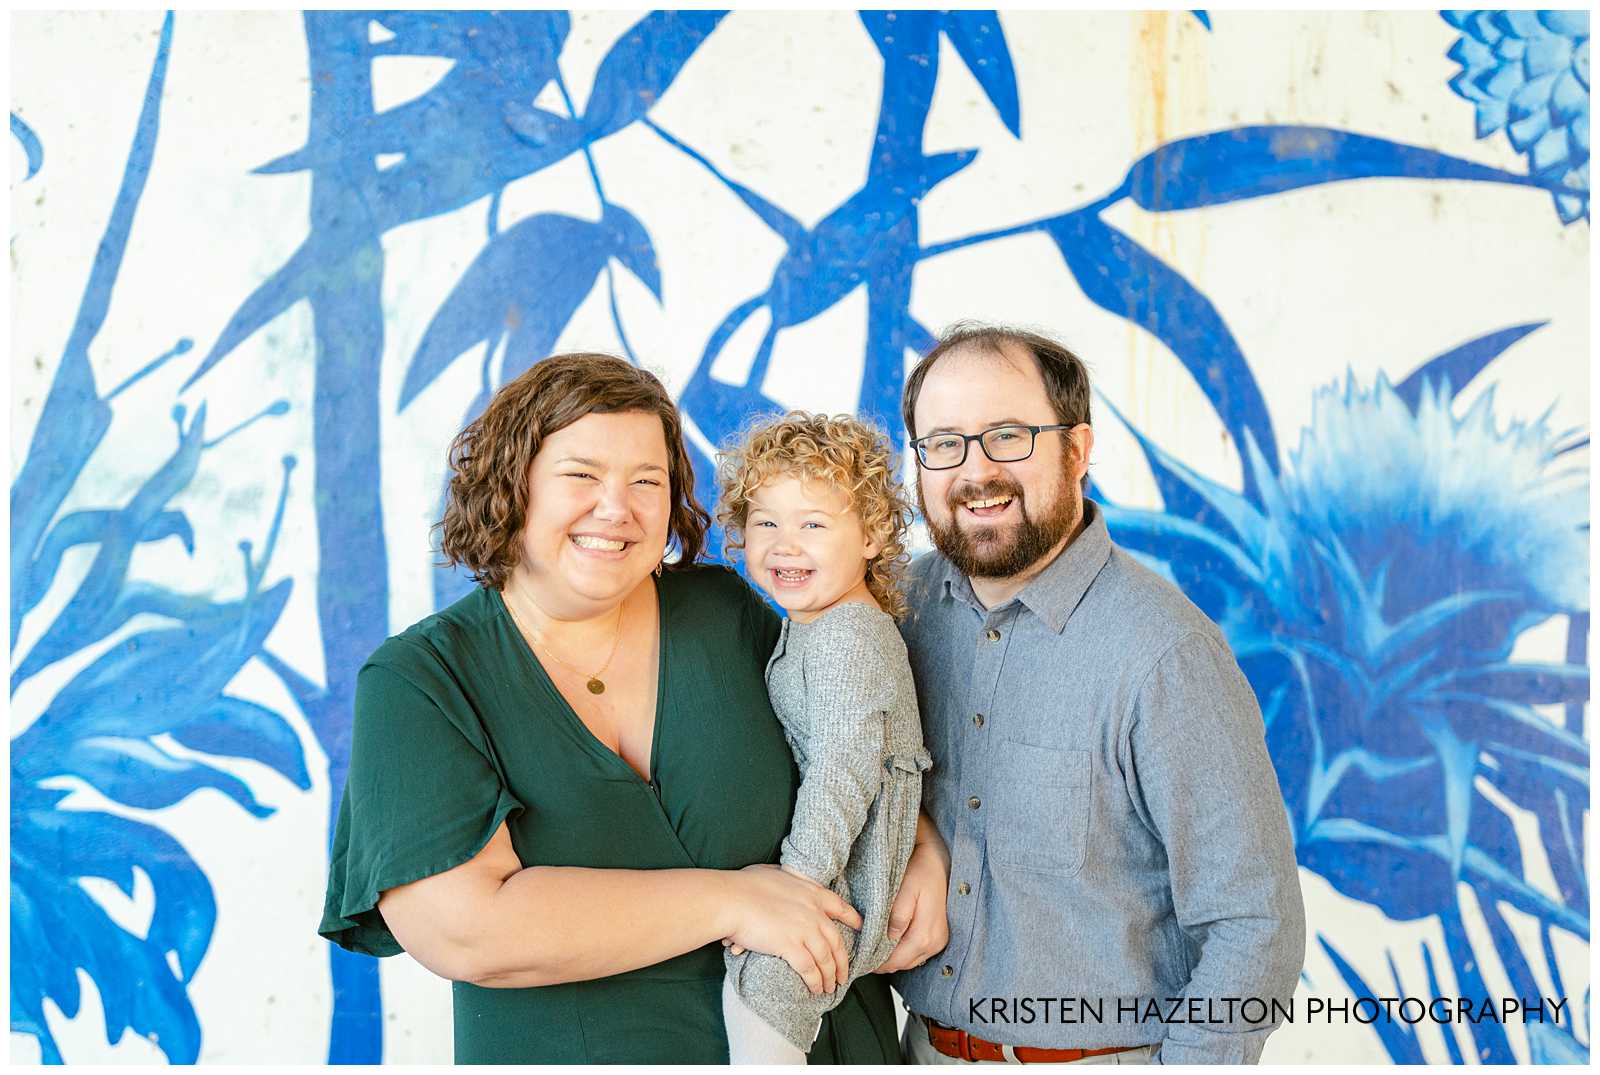 Family photos at Ping Tom Memorial Park in Chicago with blue and white mural in the background